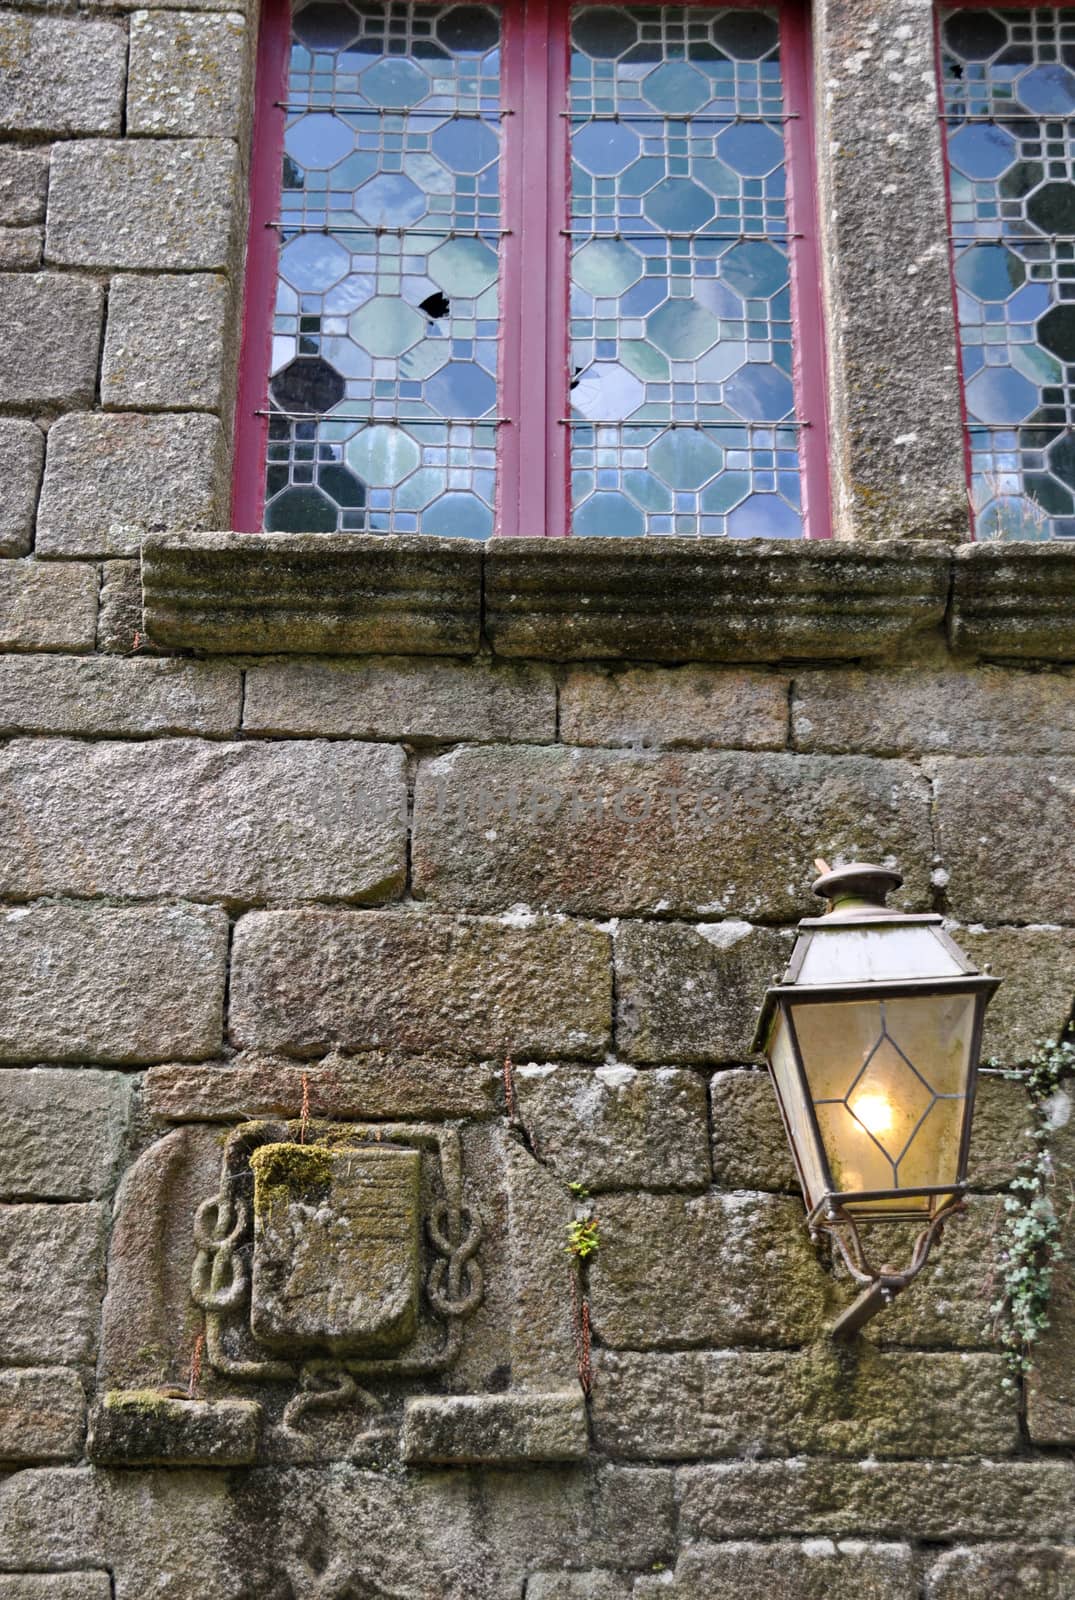 Old lamp in Locronan, Brittany, France.